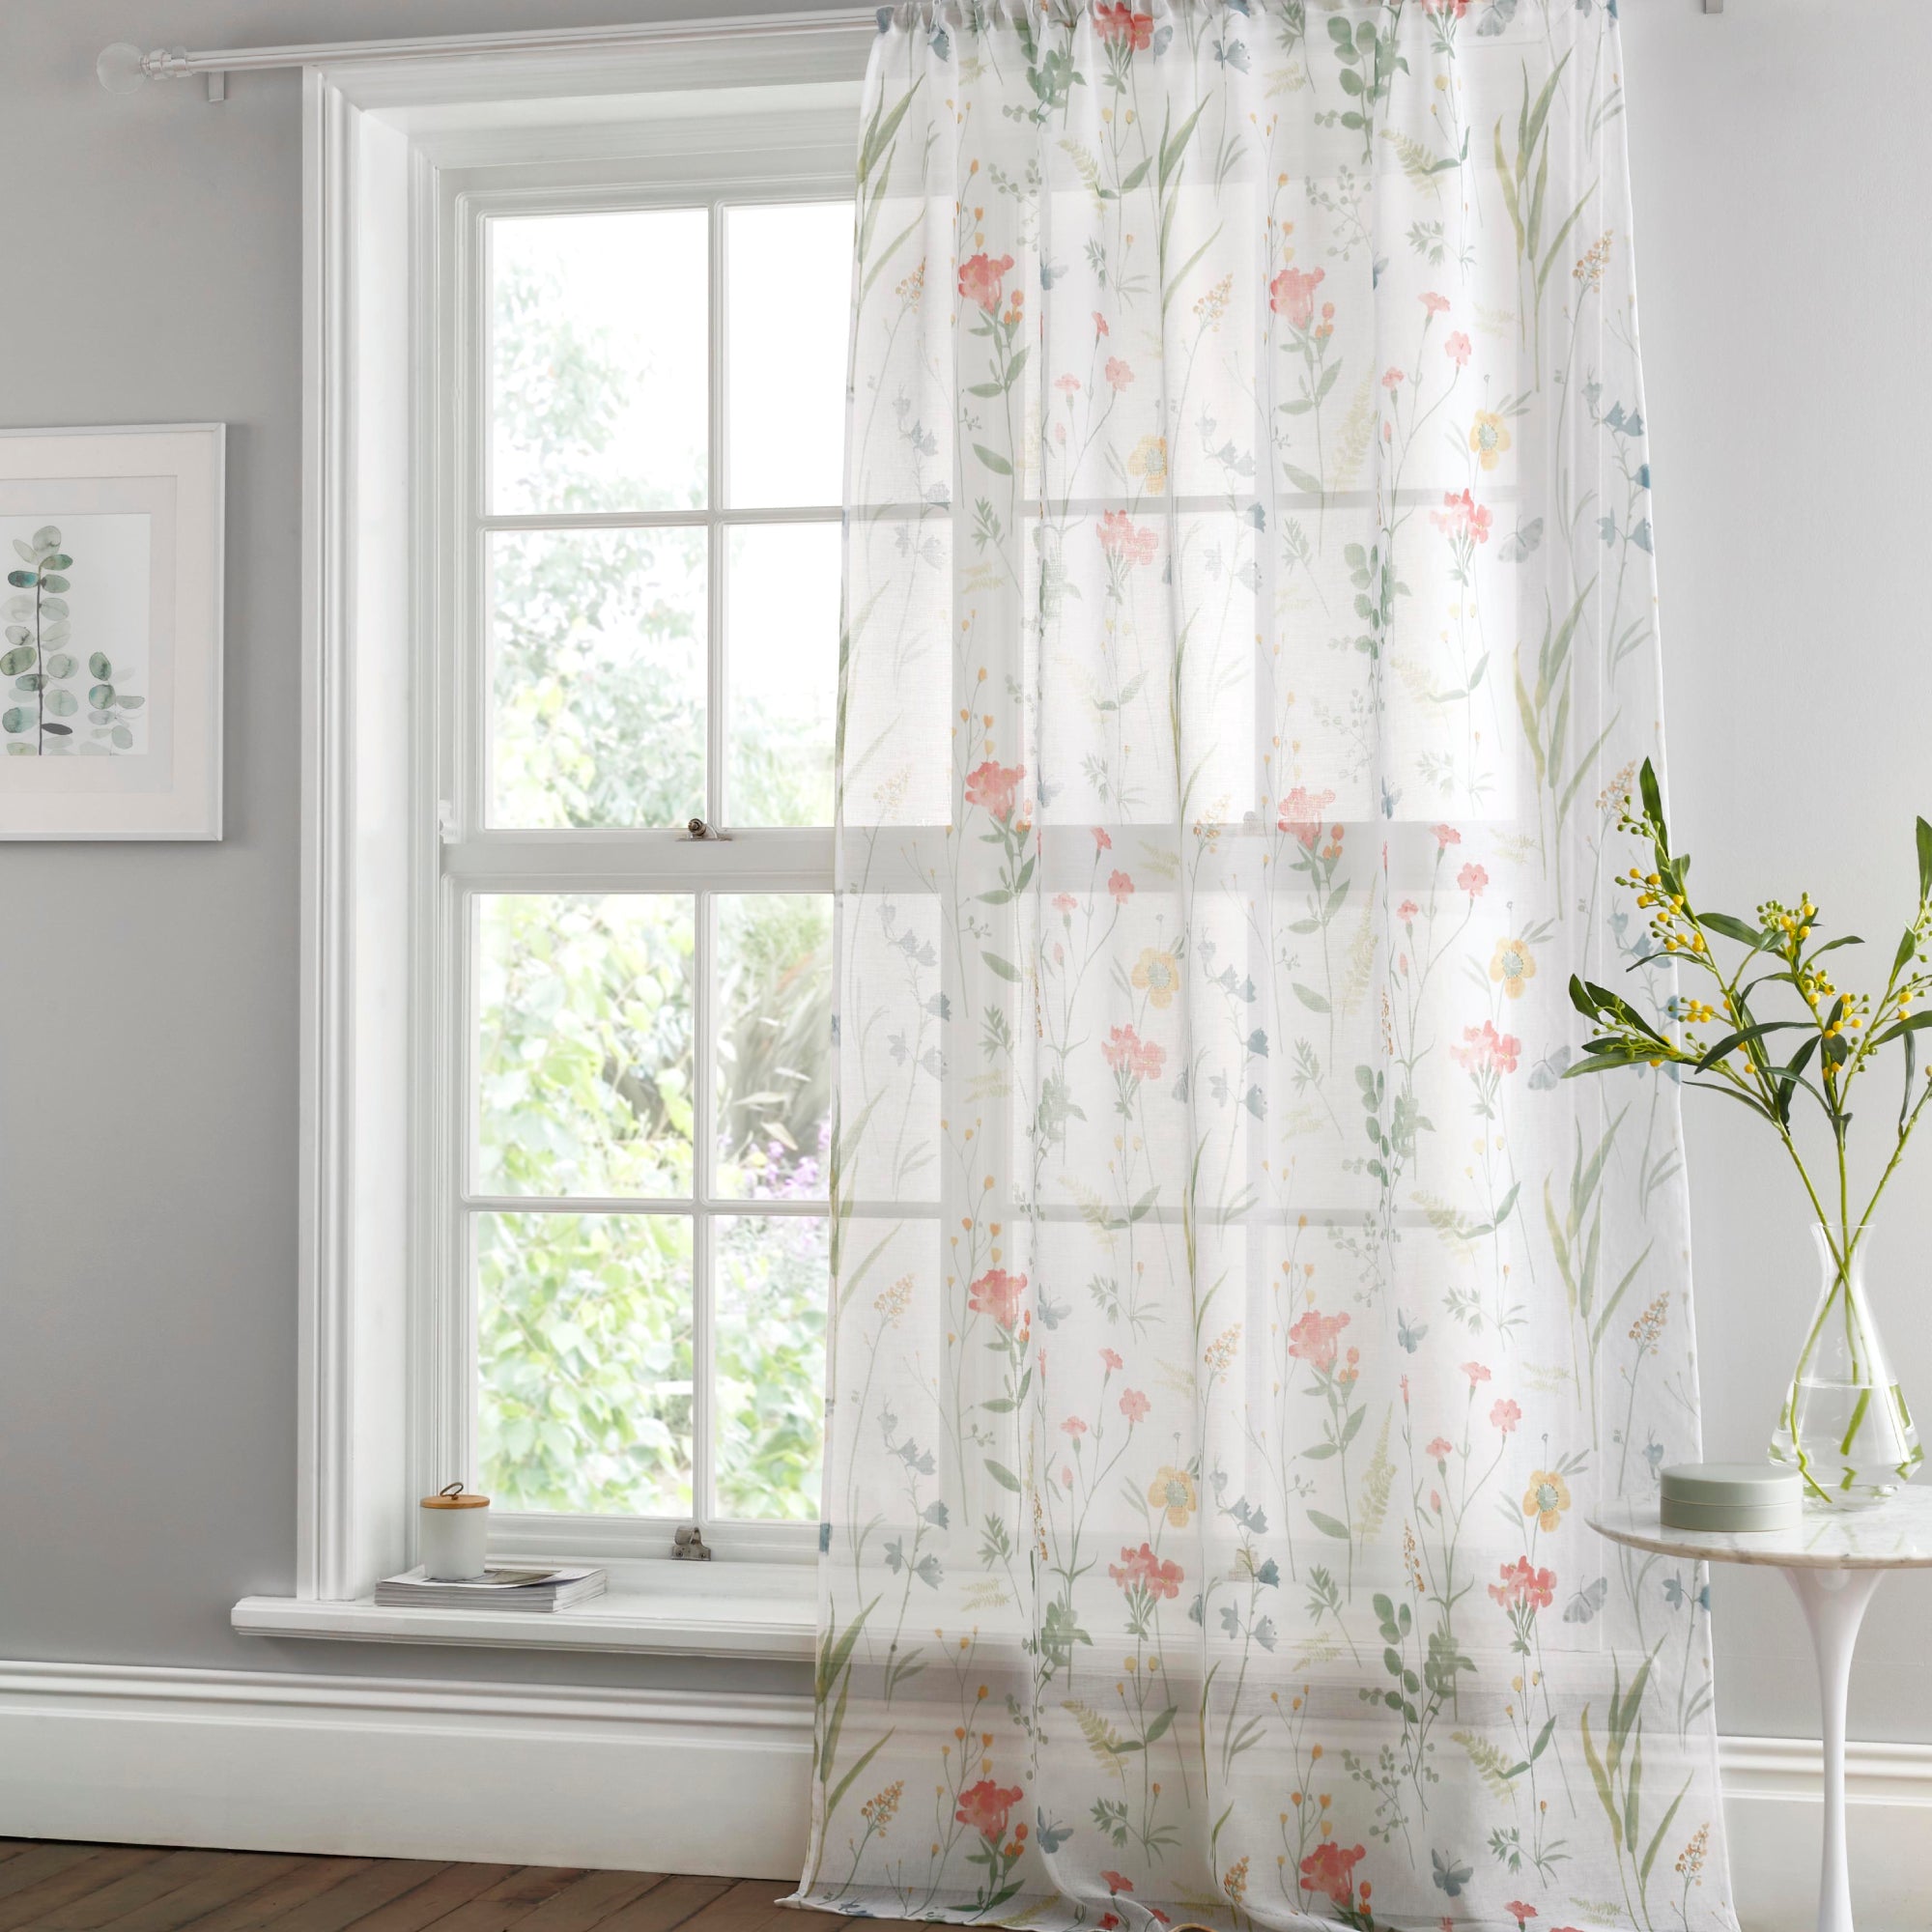 Voile Panel Spring Glade by Dreams & Drapes Curtains in Multi